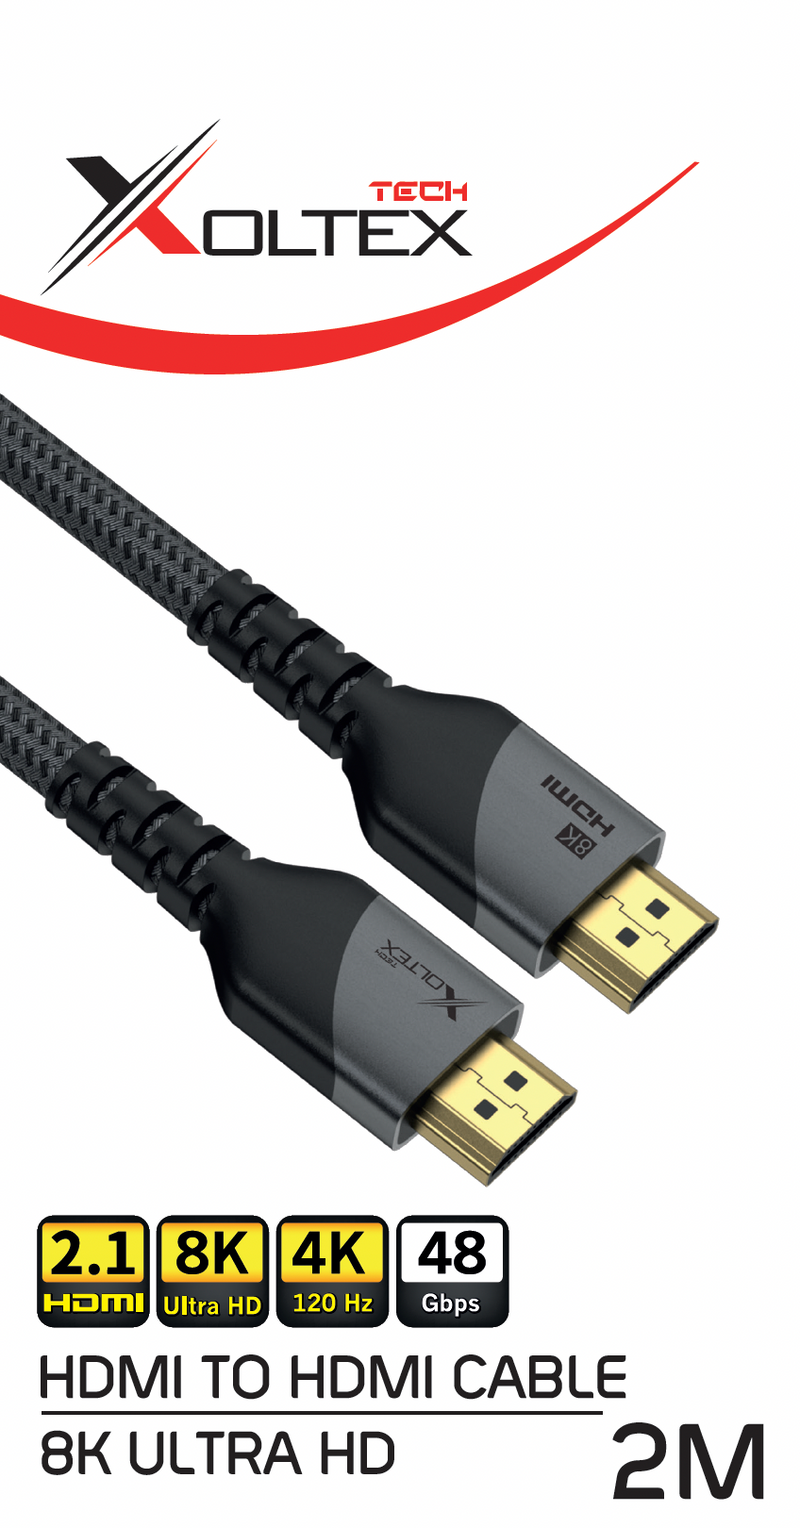 XOLTEX HDMI to HDMI Cable RRP-$24.99